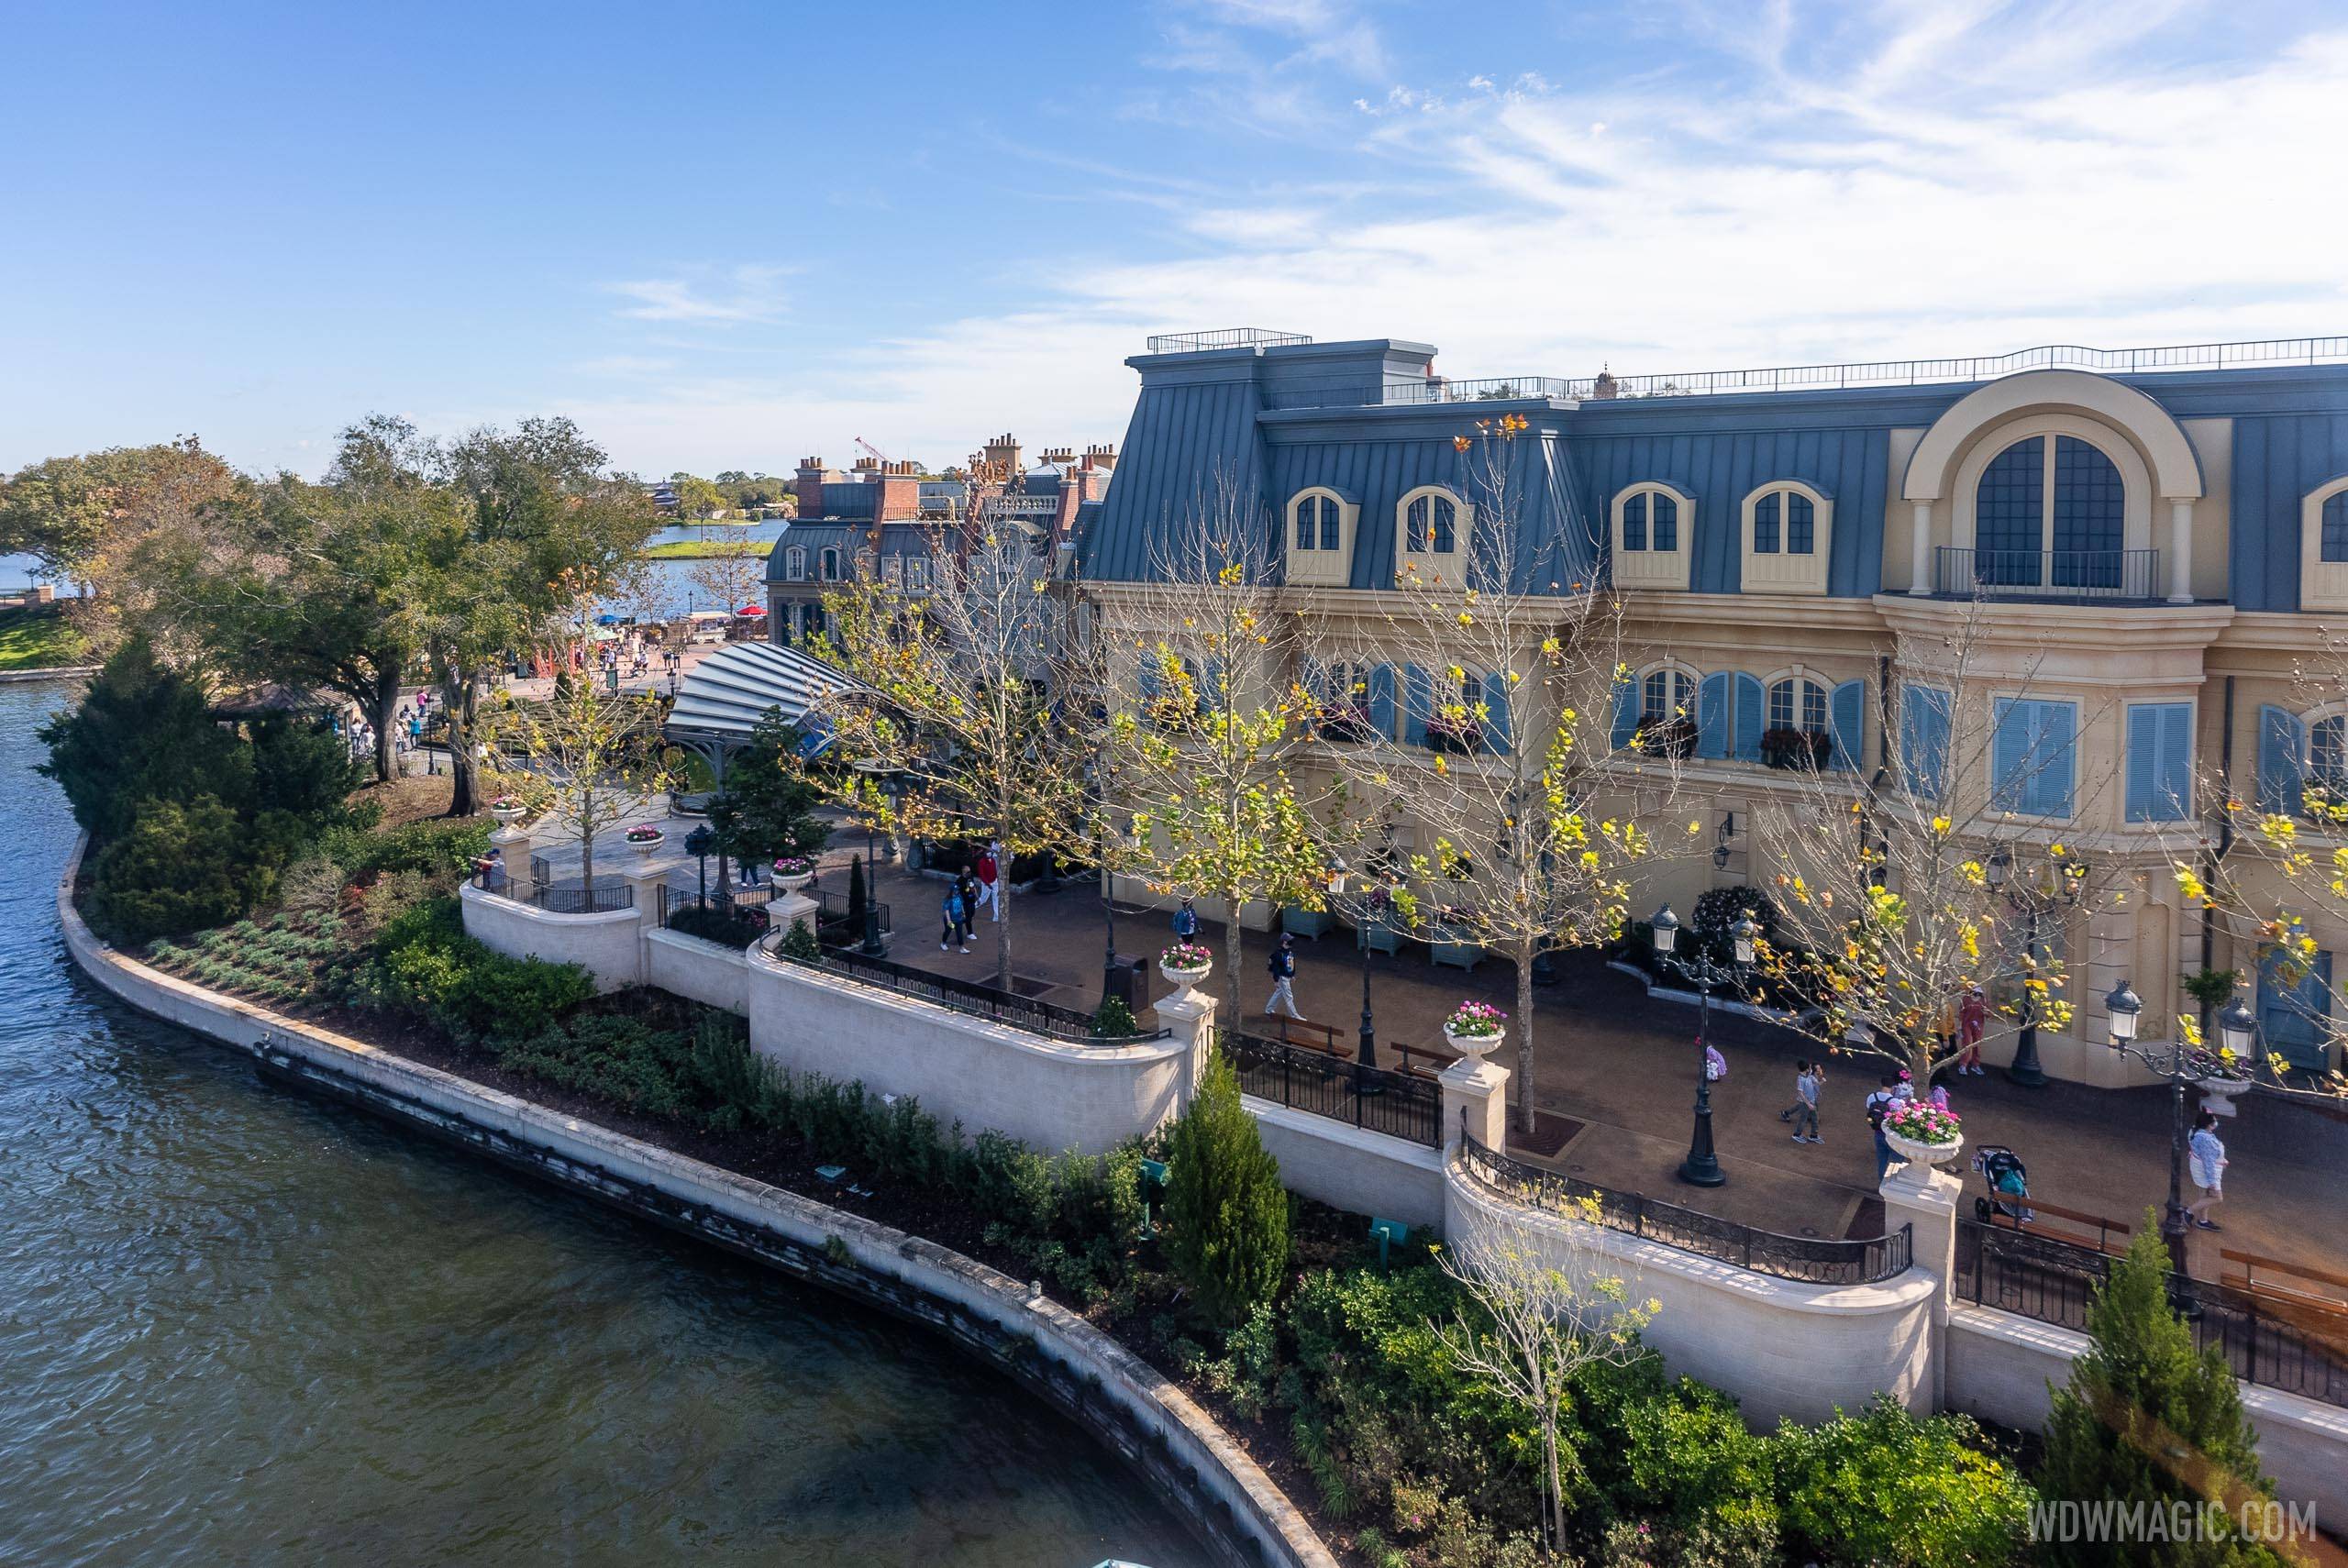 First phase of the France pavilion expansion opens to guests